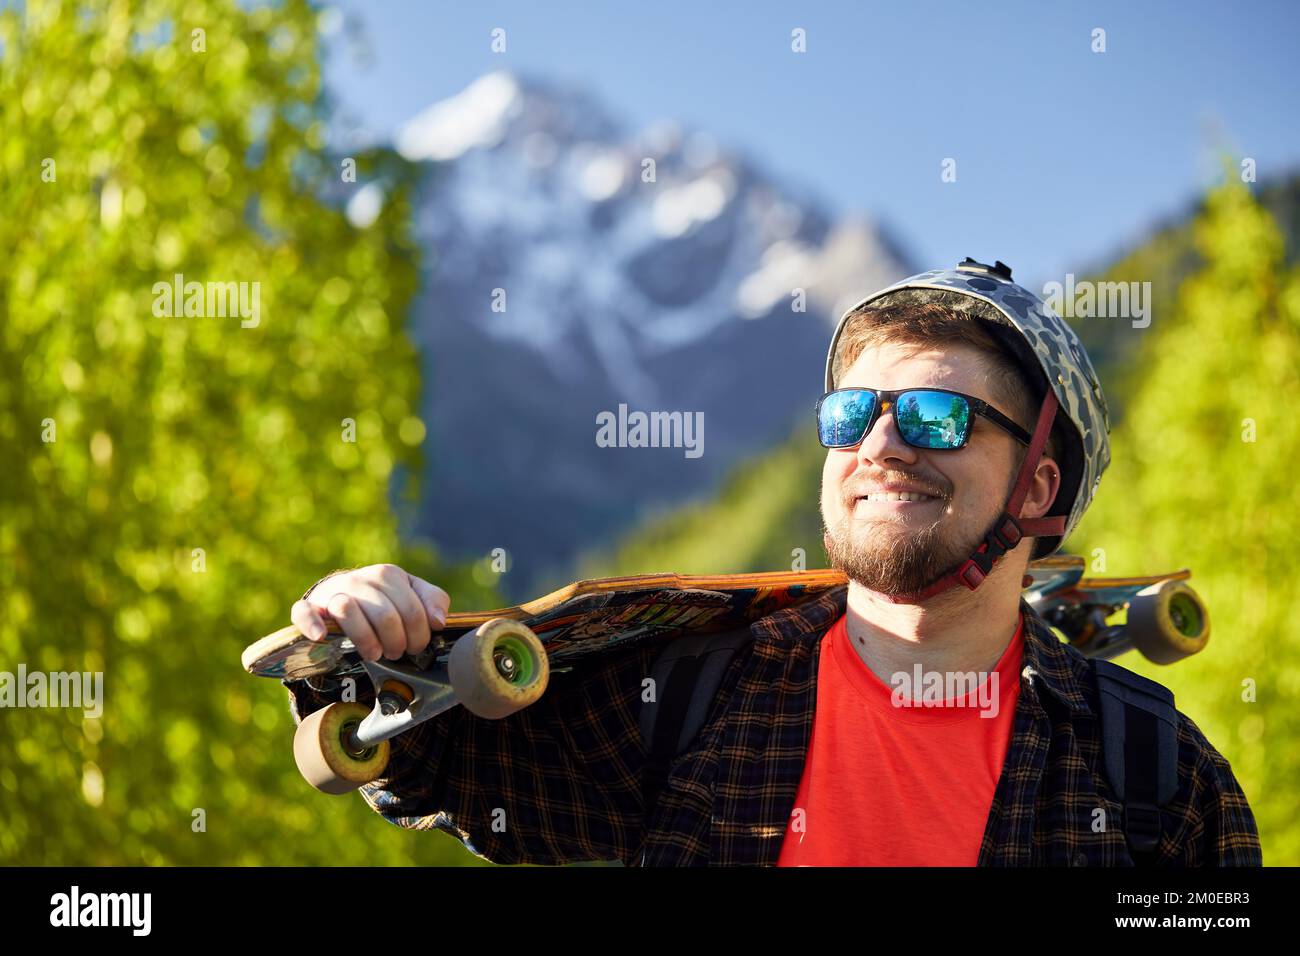 Portrait of happy bearded man Skater with sunglasses and helmet holding his longboard in the mountain at background Stock Photo